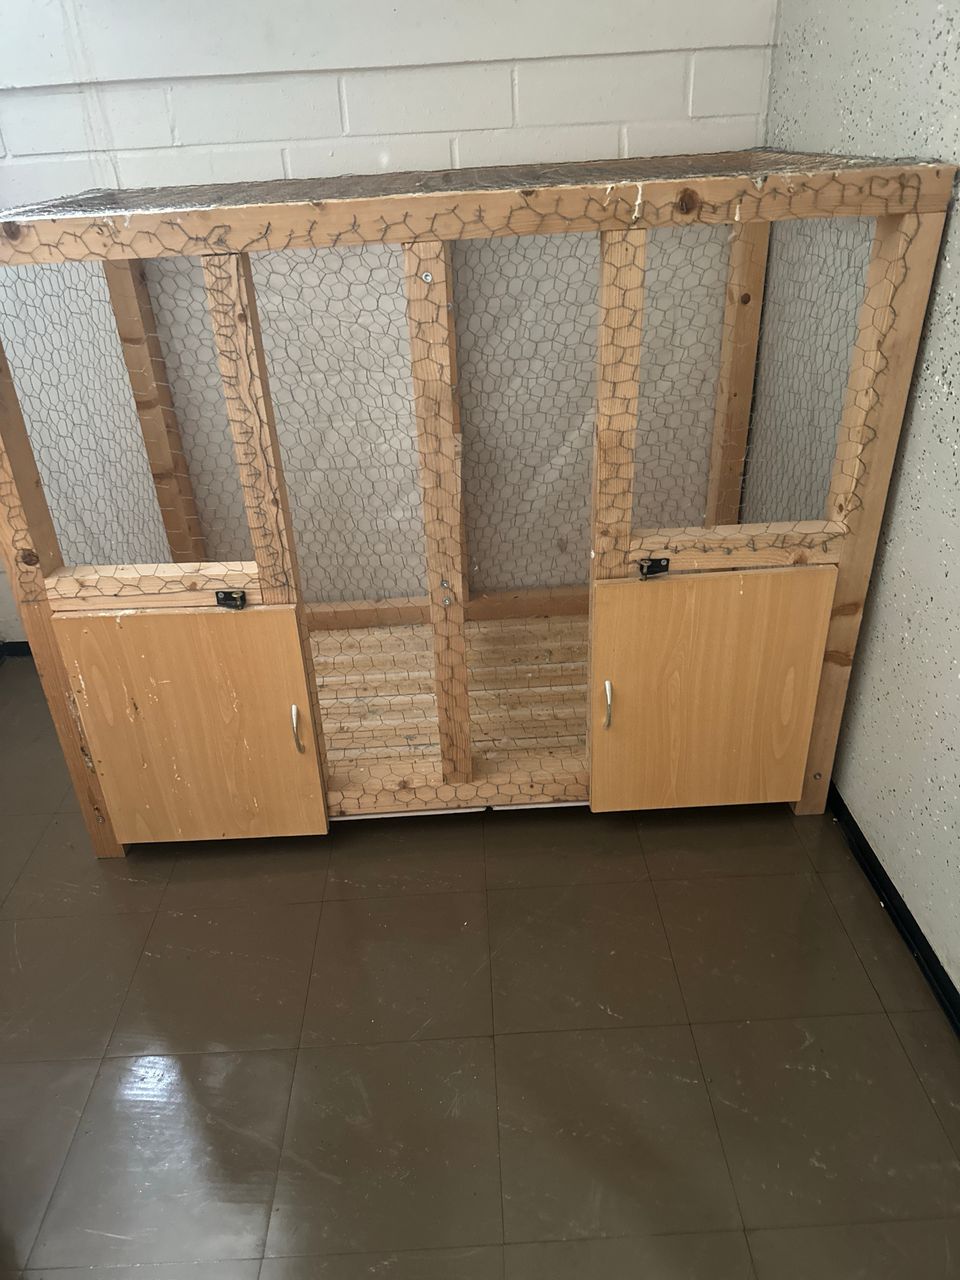 Cage for house pet